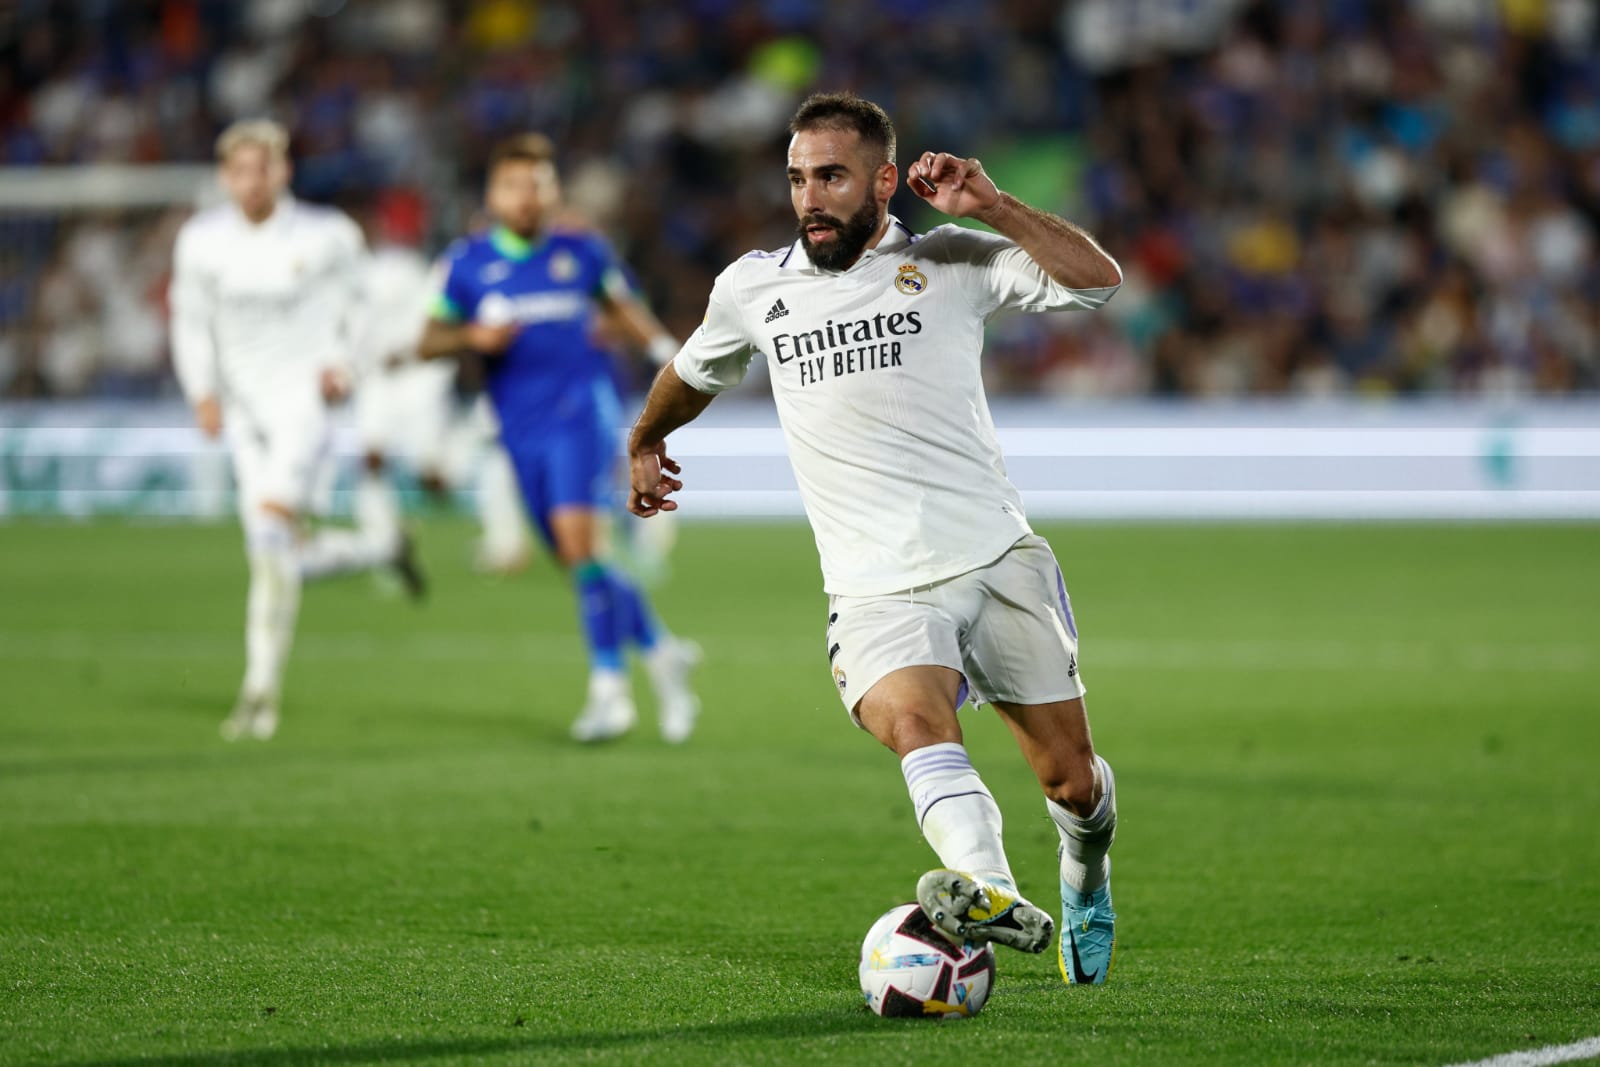 Getafe vs Real Madrid HIGHLIGHTS-GET 0-1 RMA, Eder Militao's goal POWERS Real Madrid to take Top Spot in La Liga Points Table - CHECK HIGHLIGHTS